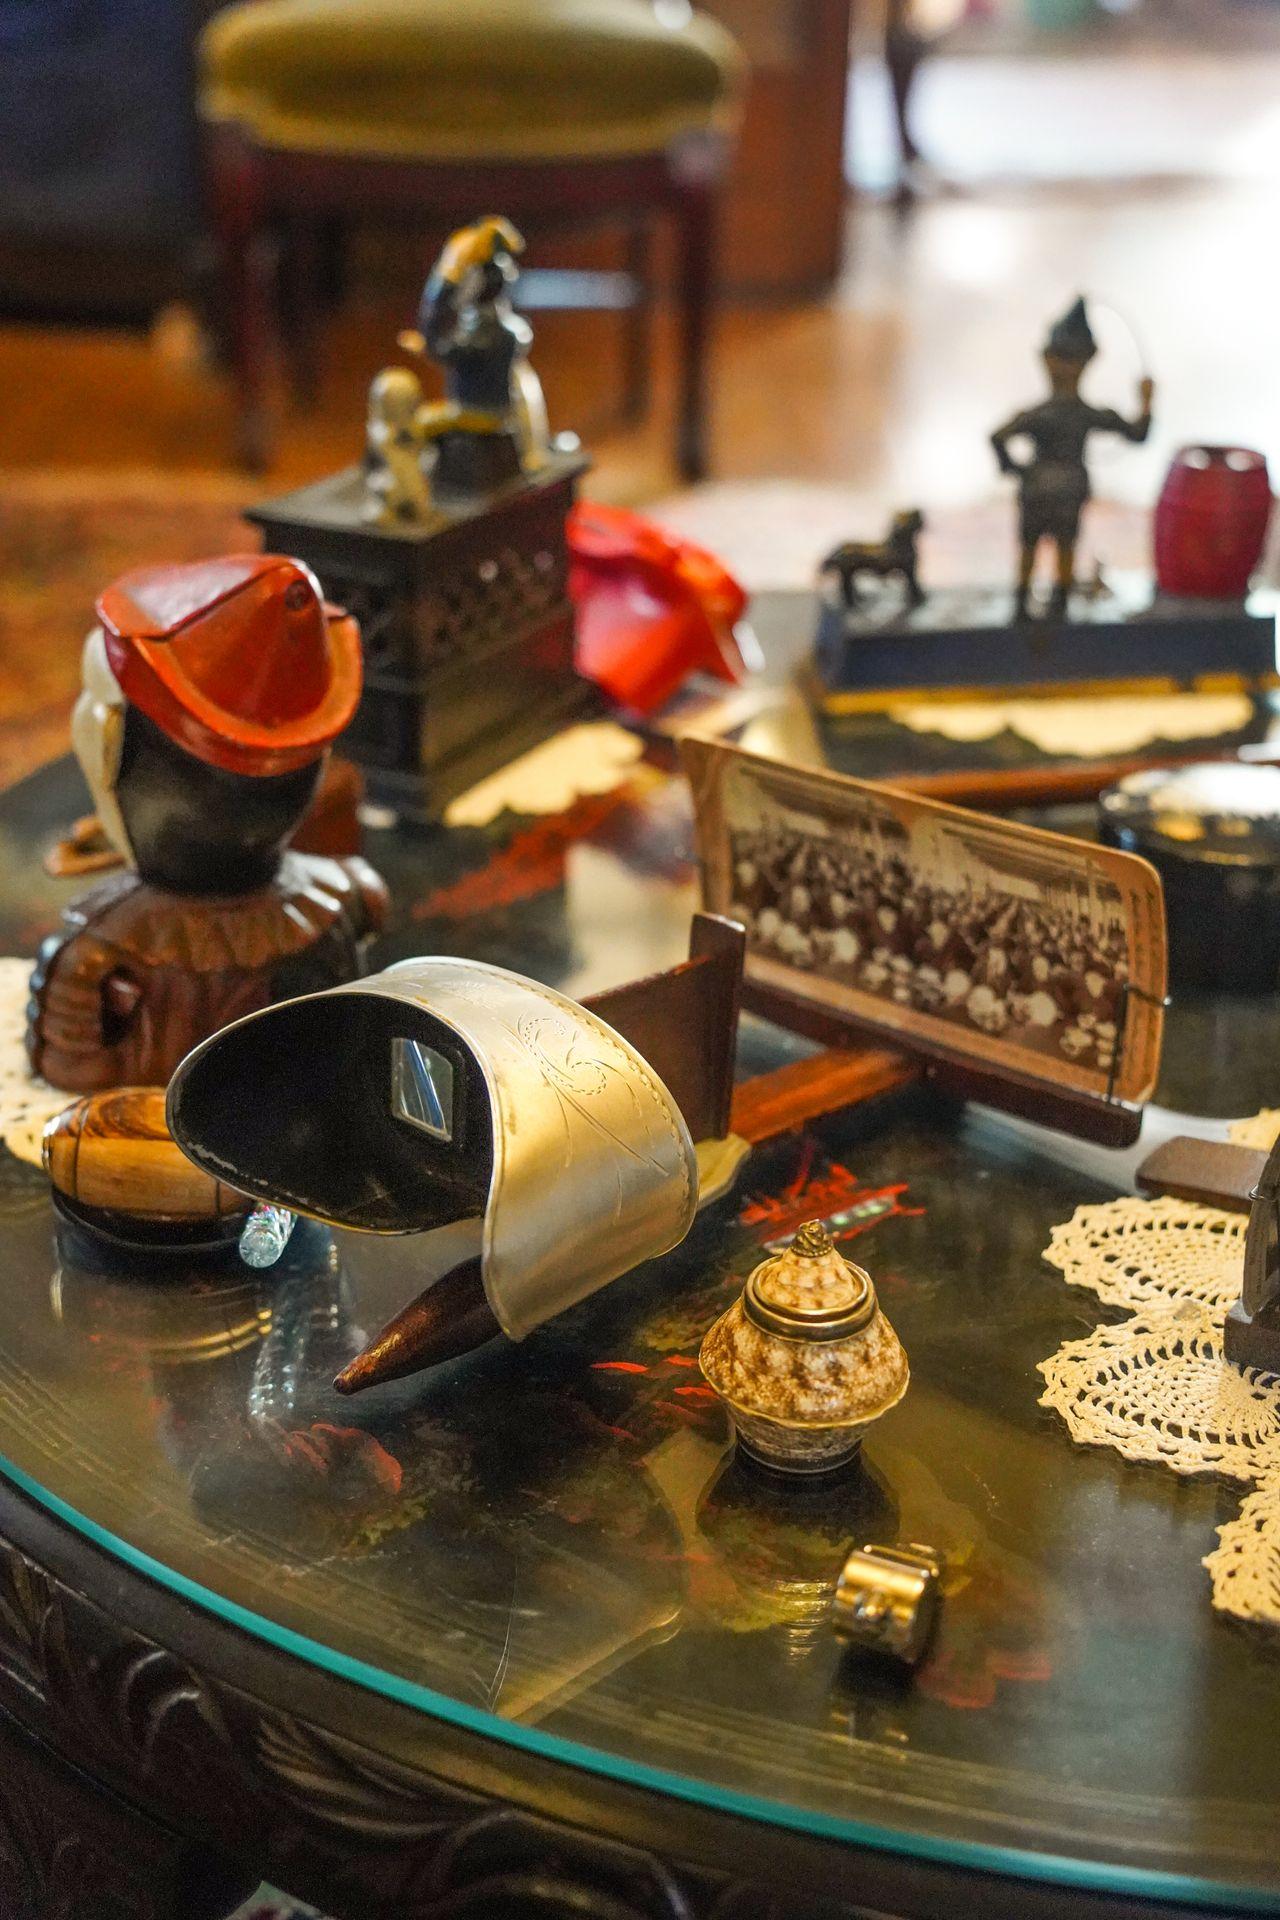 A few vintage items on the table at The Queen Bed & Breakfast. The main items is a vintage stereograph